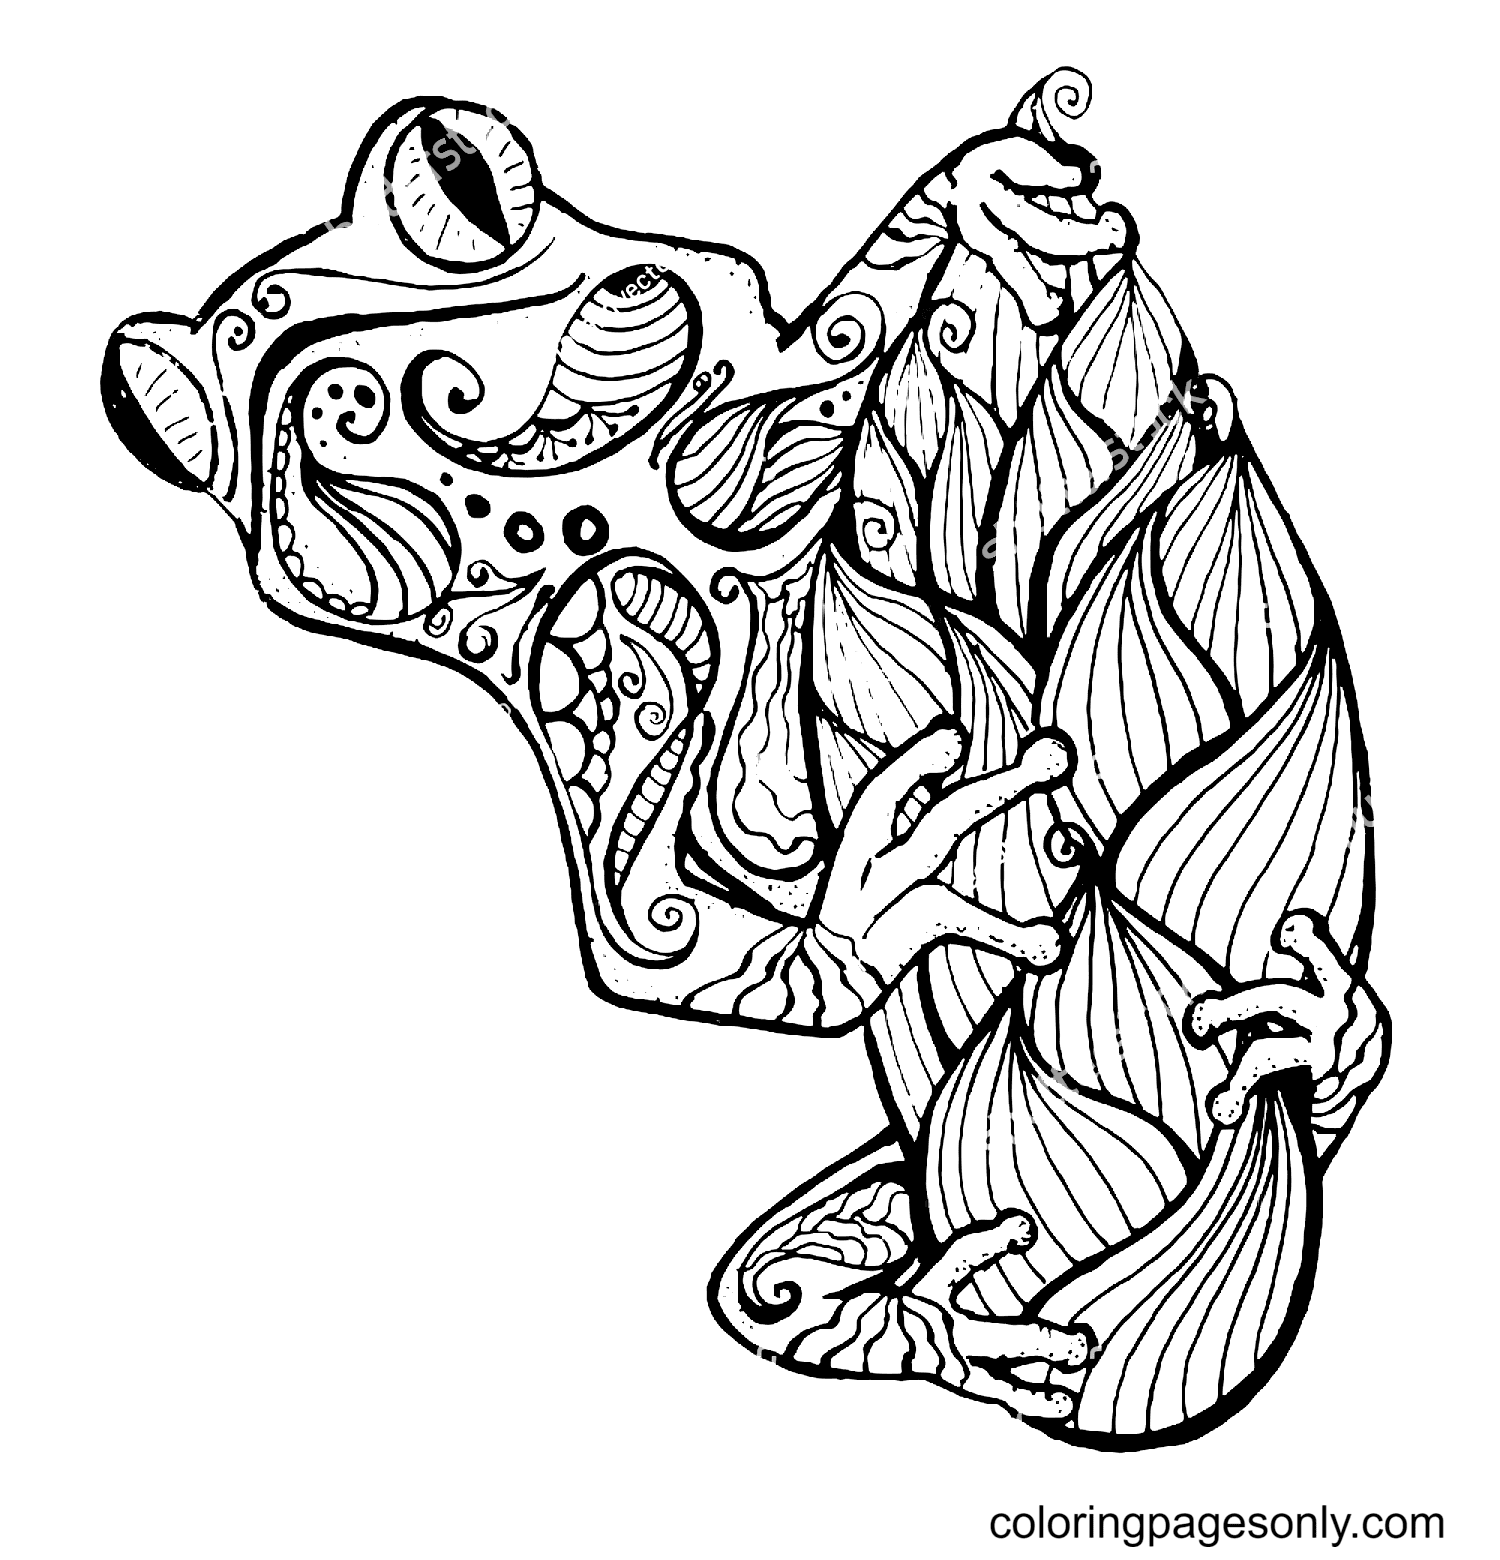 Frog Zentangle Coloring Pages - Frog Coloring Pages - Coloring Pages For  Kids And Adults